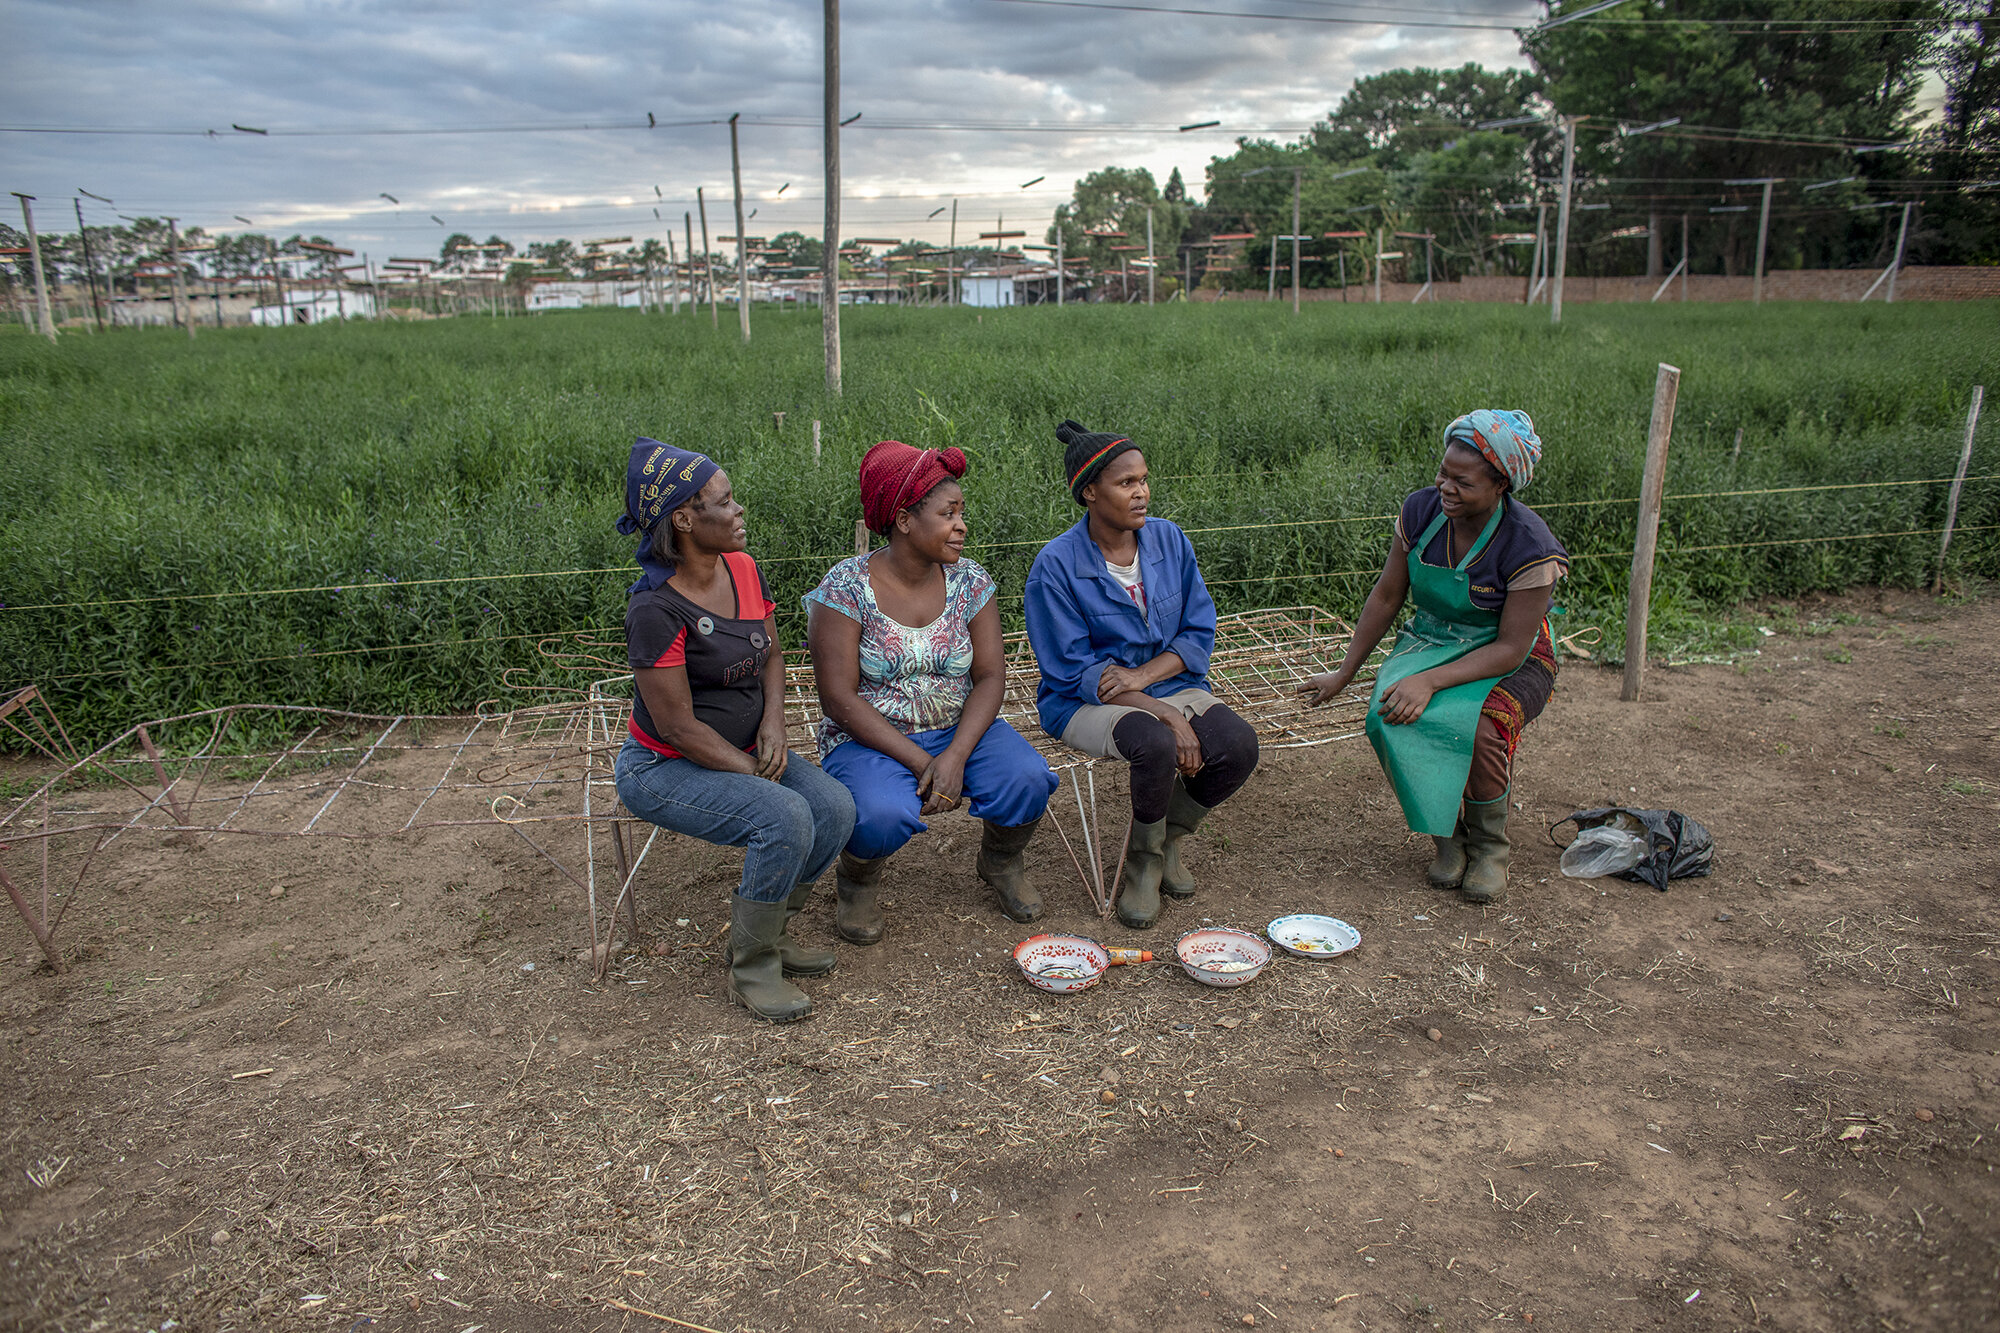  October 21, 2018: Roselyn and her fellow grading shed colleagues chat during a dinner break on a day when they had a long shift. When they work into the night dinner is provided for them.  